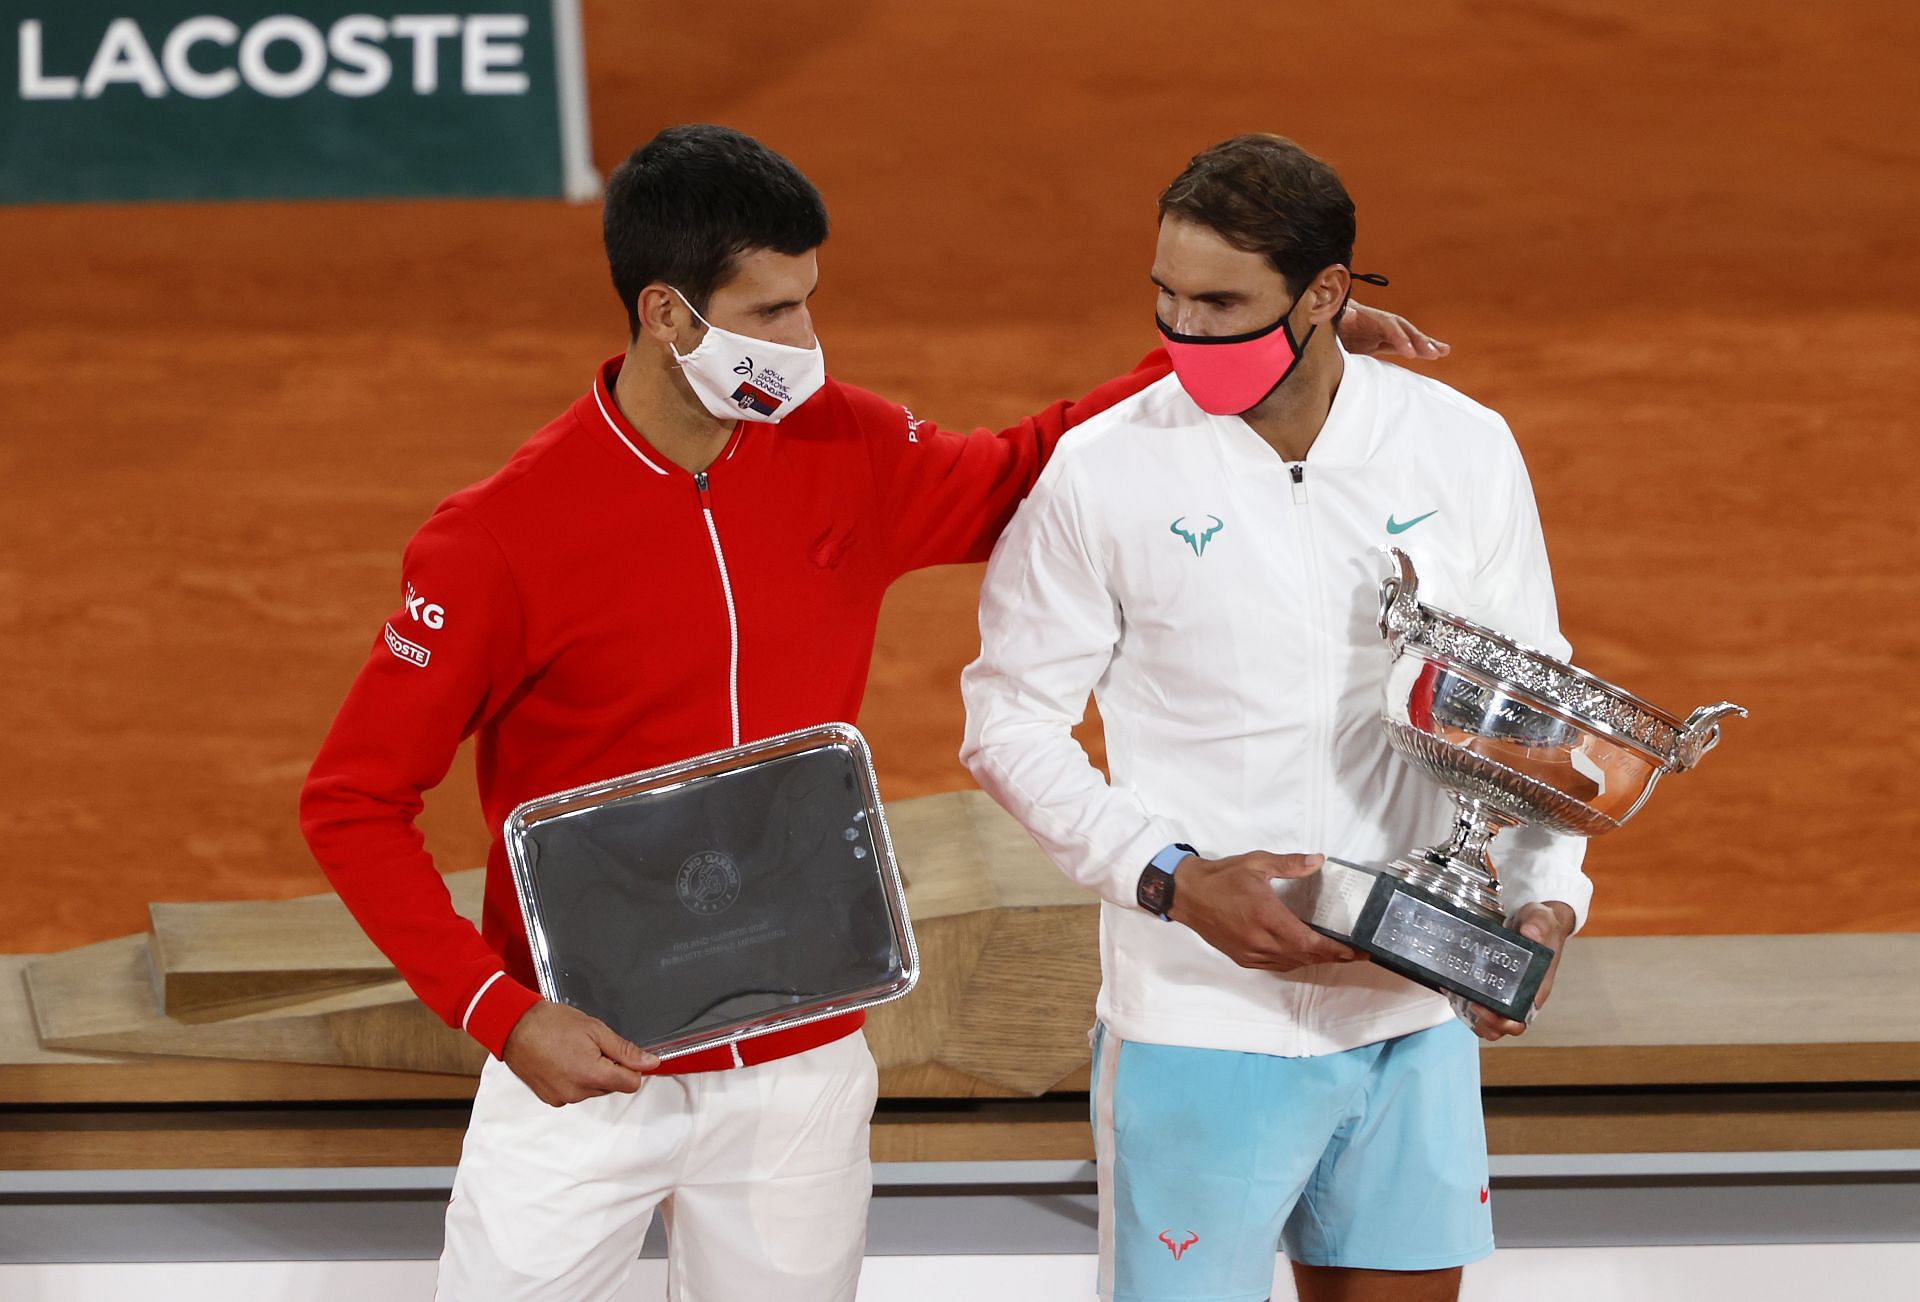 Nadal and Djokovic at the 2020 French Open